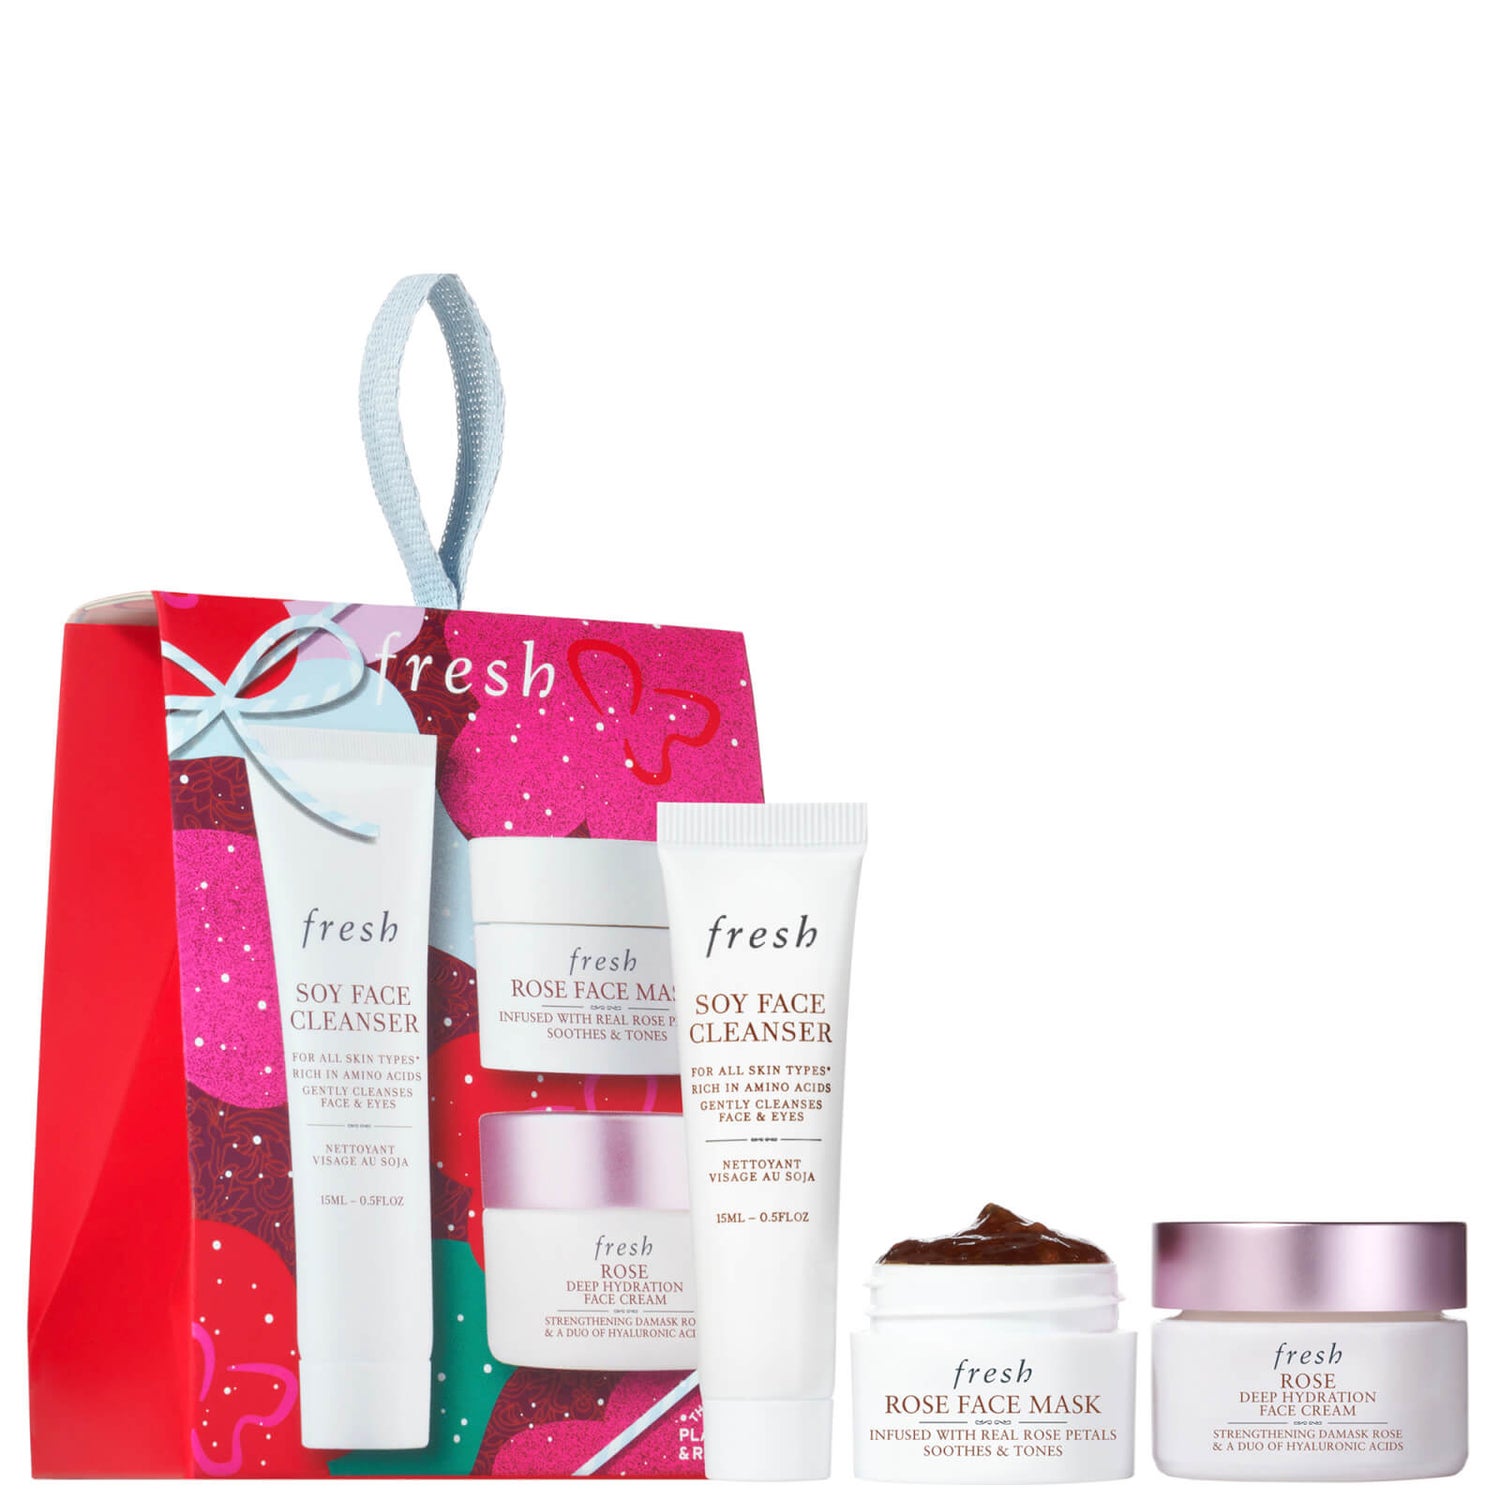 Fresh Cleanse and Hydrate Skincare Set (Worth £30.00)